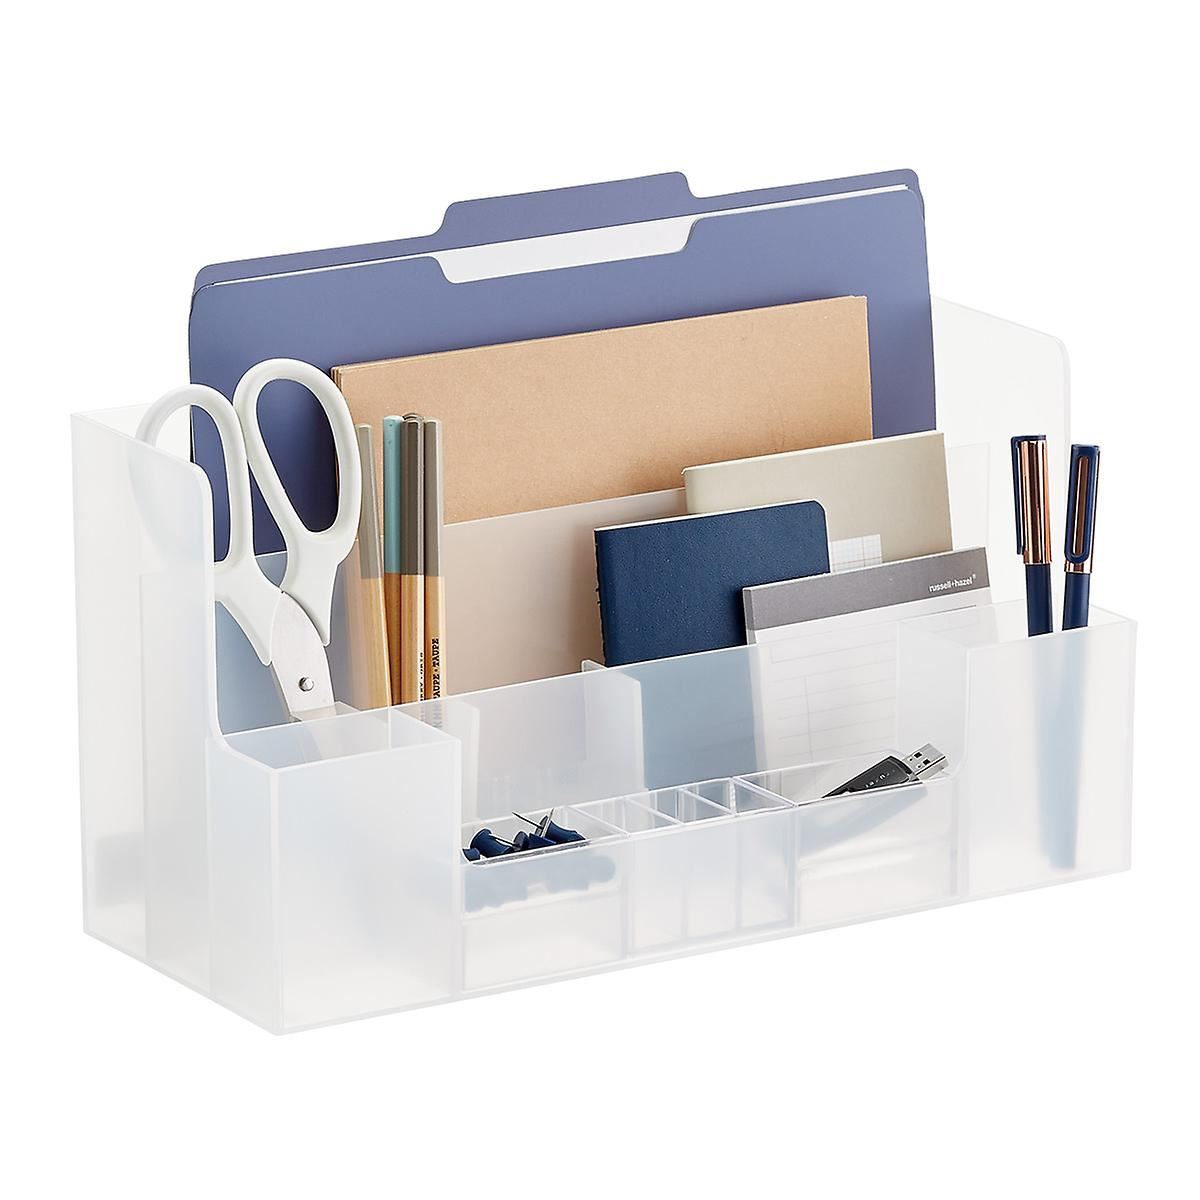 Paper organizing command center from Container Store